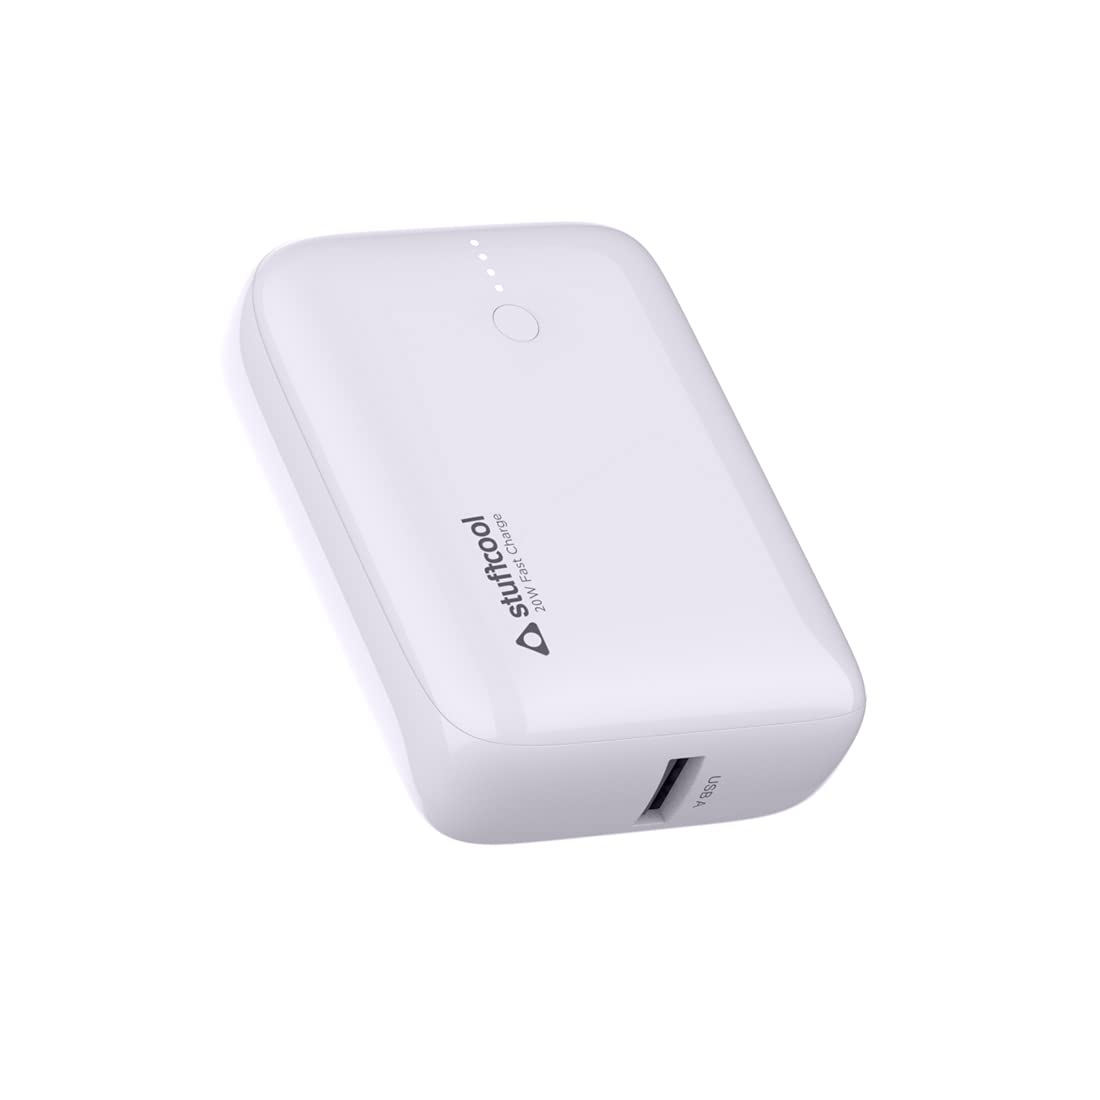 Stuffcool 10000mAh Palm Smallest QC PD 20W Type C Super Premium Mini Powerbank, Charges Any iPhone 50% in 30 mins (Glazed White/Lilac)